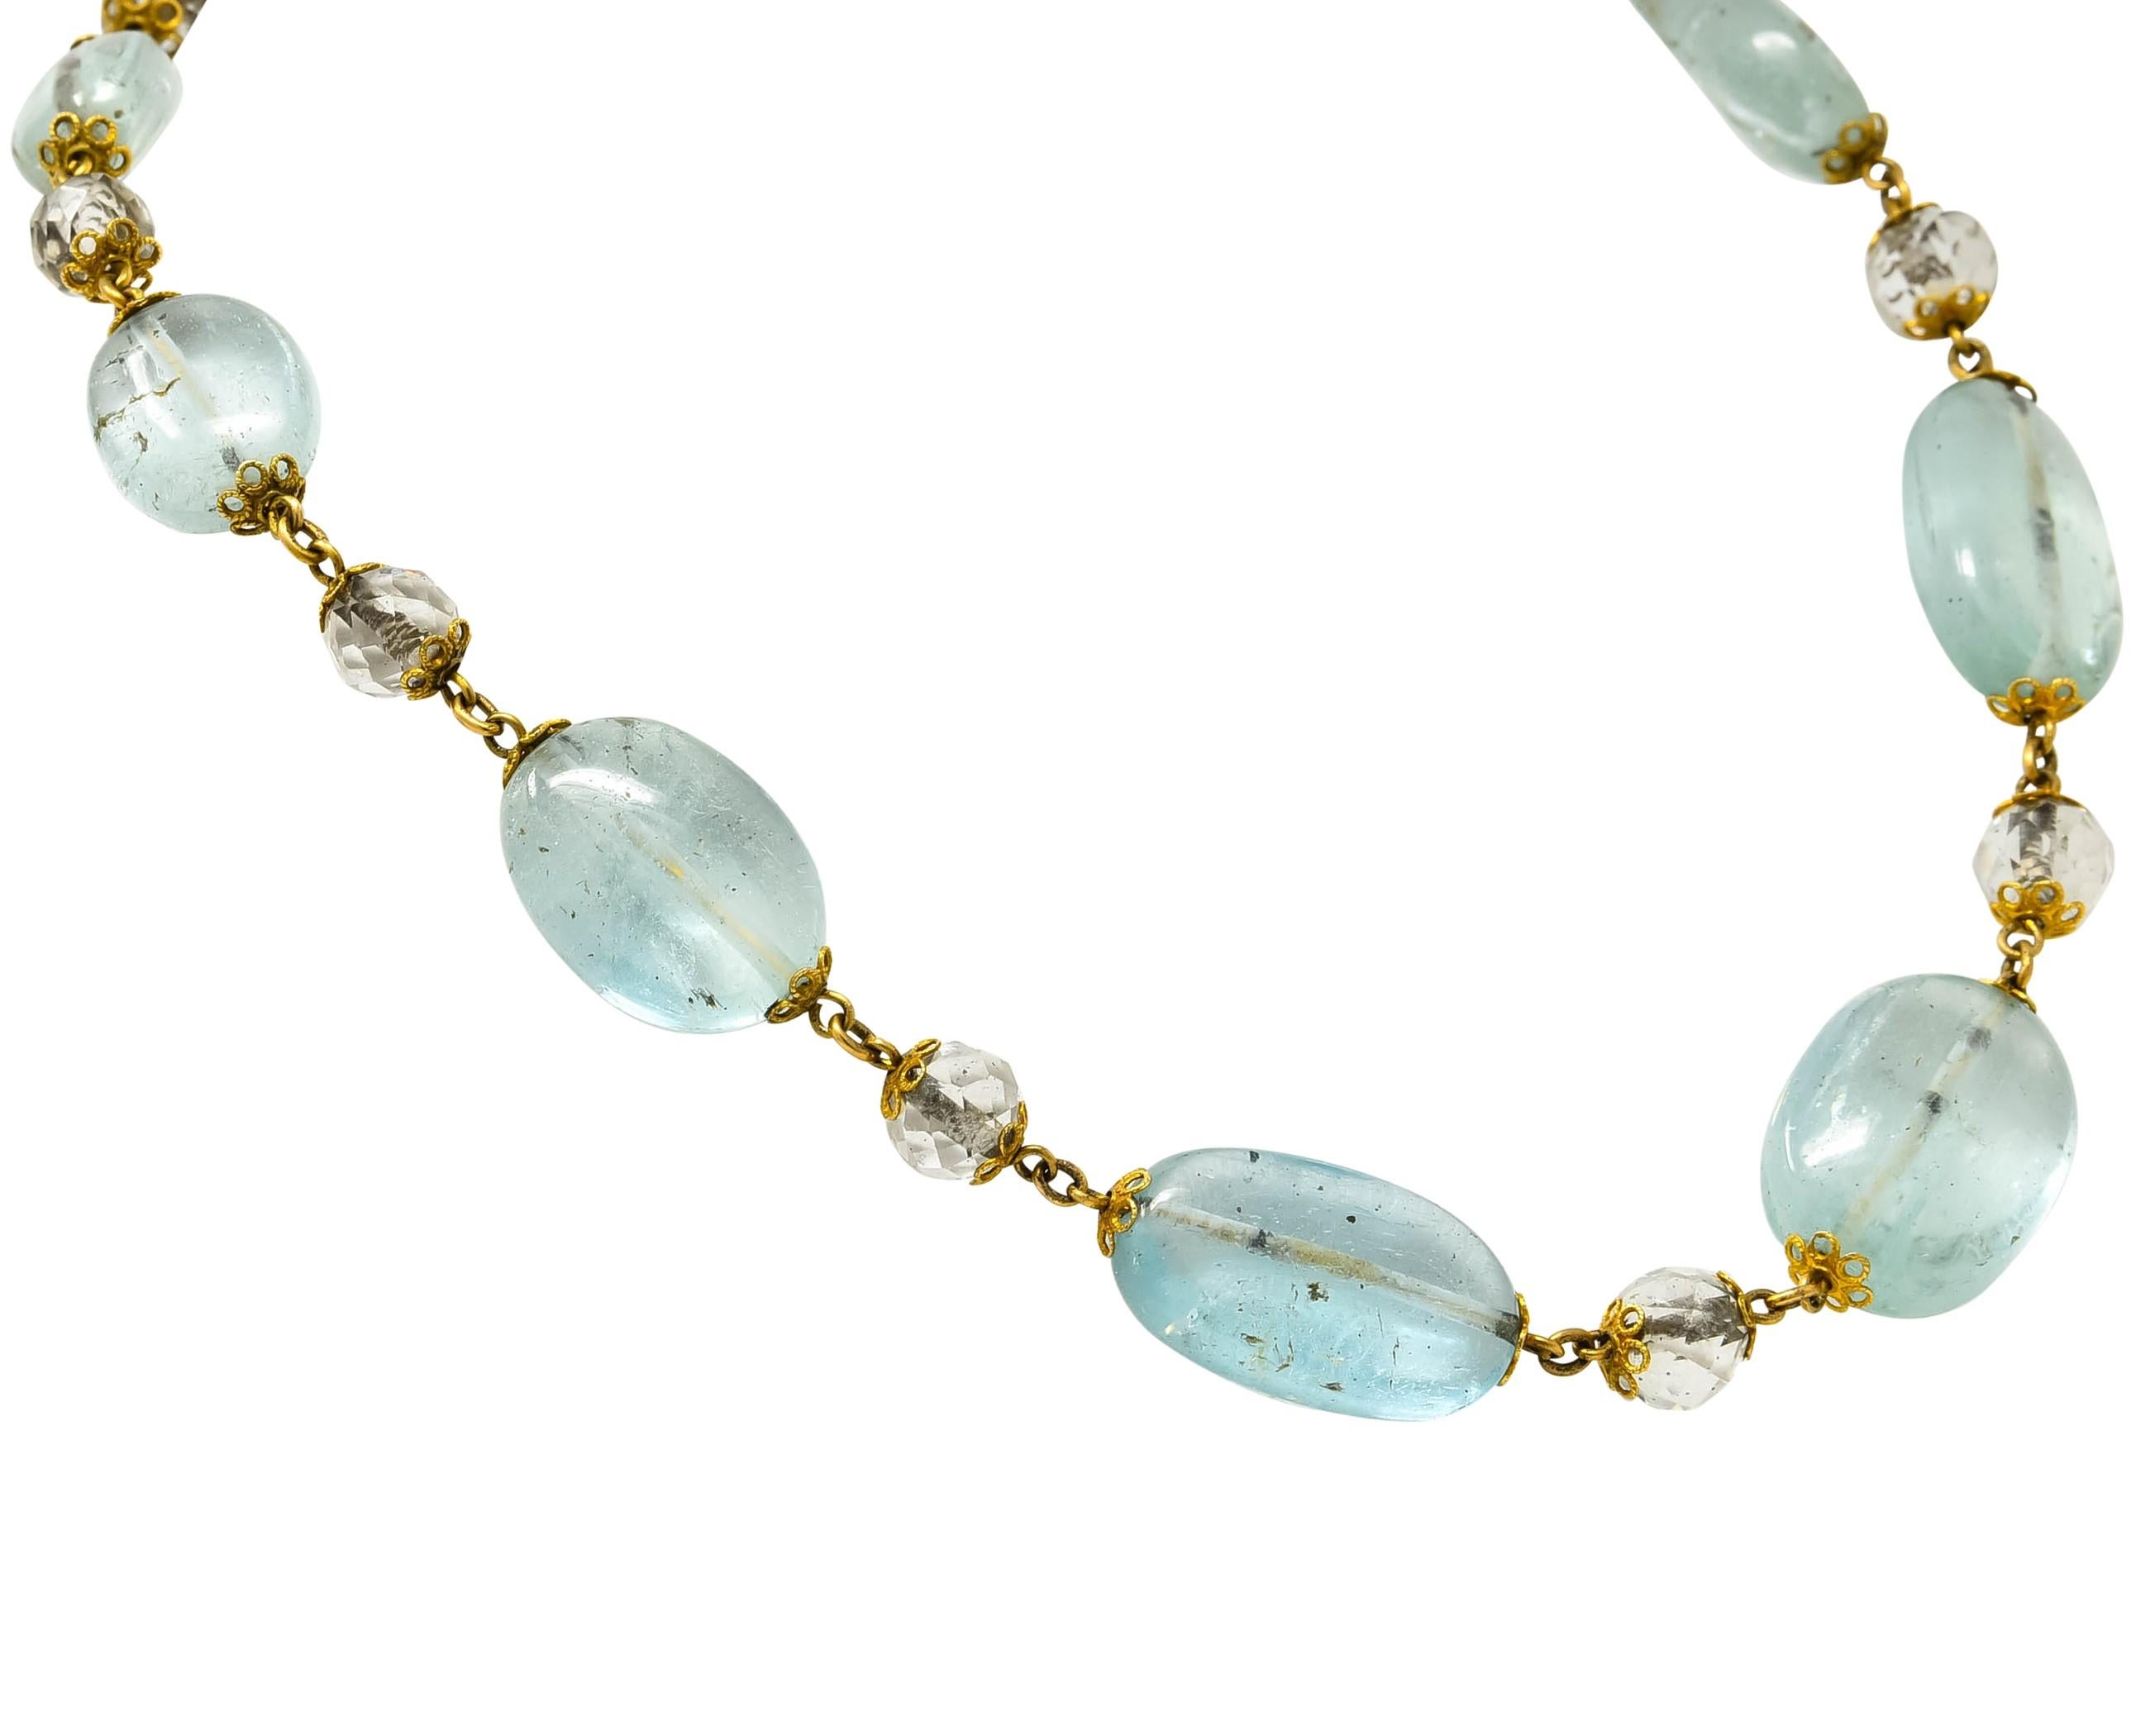 Necklace comprised of round faceted rock crystal beads measuring approximately 7.5 to 8.1 mm

Alternating with oval cabochon aquamarine beads that graduate in size, semi-transparent with natural inclusions and a very light greenish-blue in